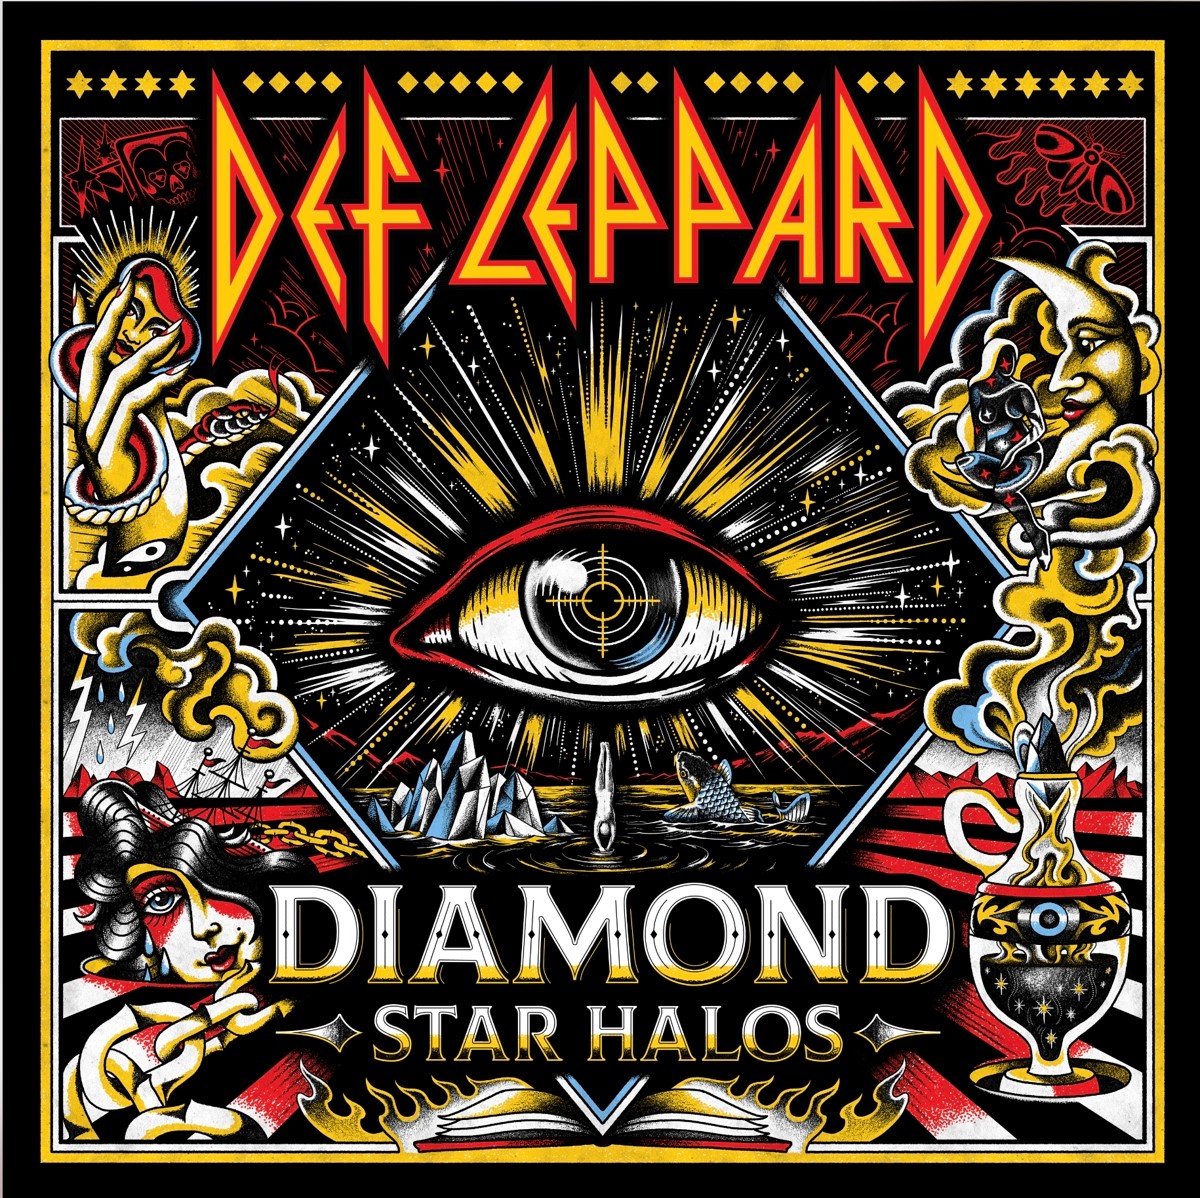 Diamond Star Halos - Limited Deluxe Edition | Def Leppard